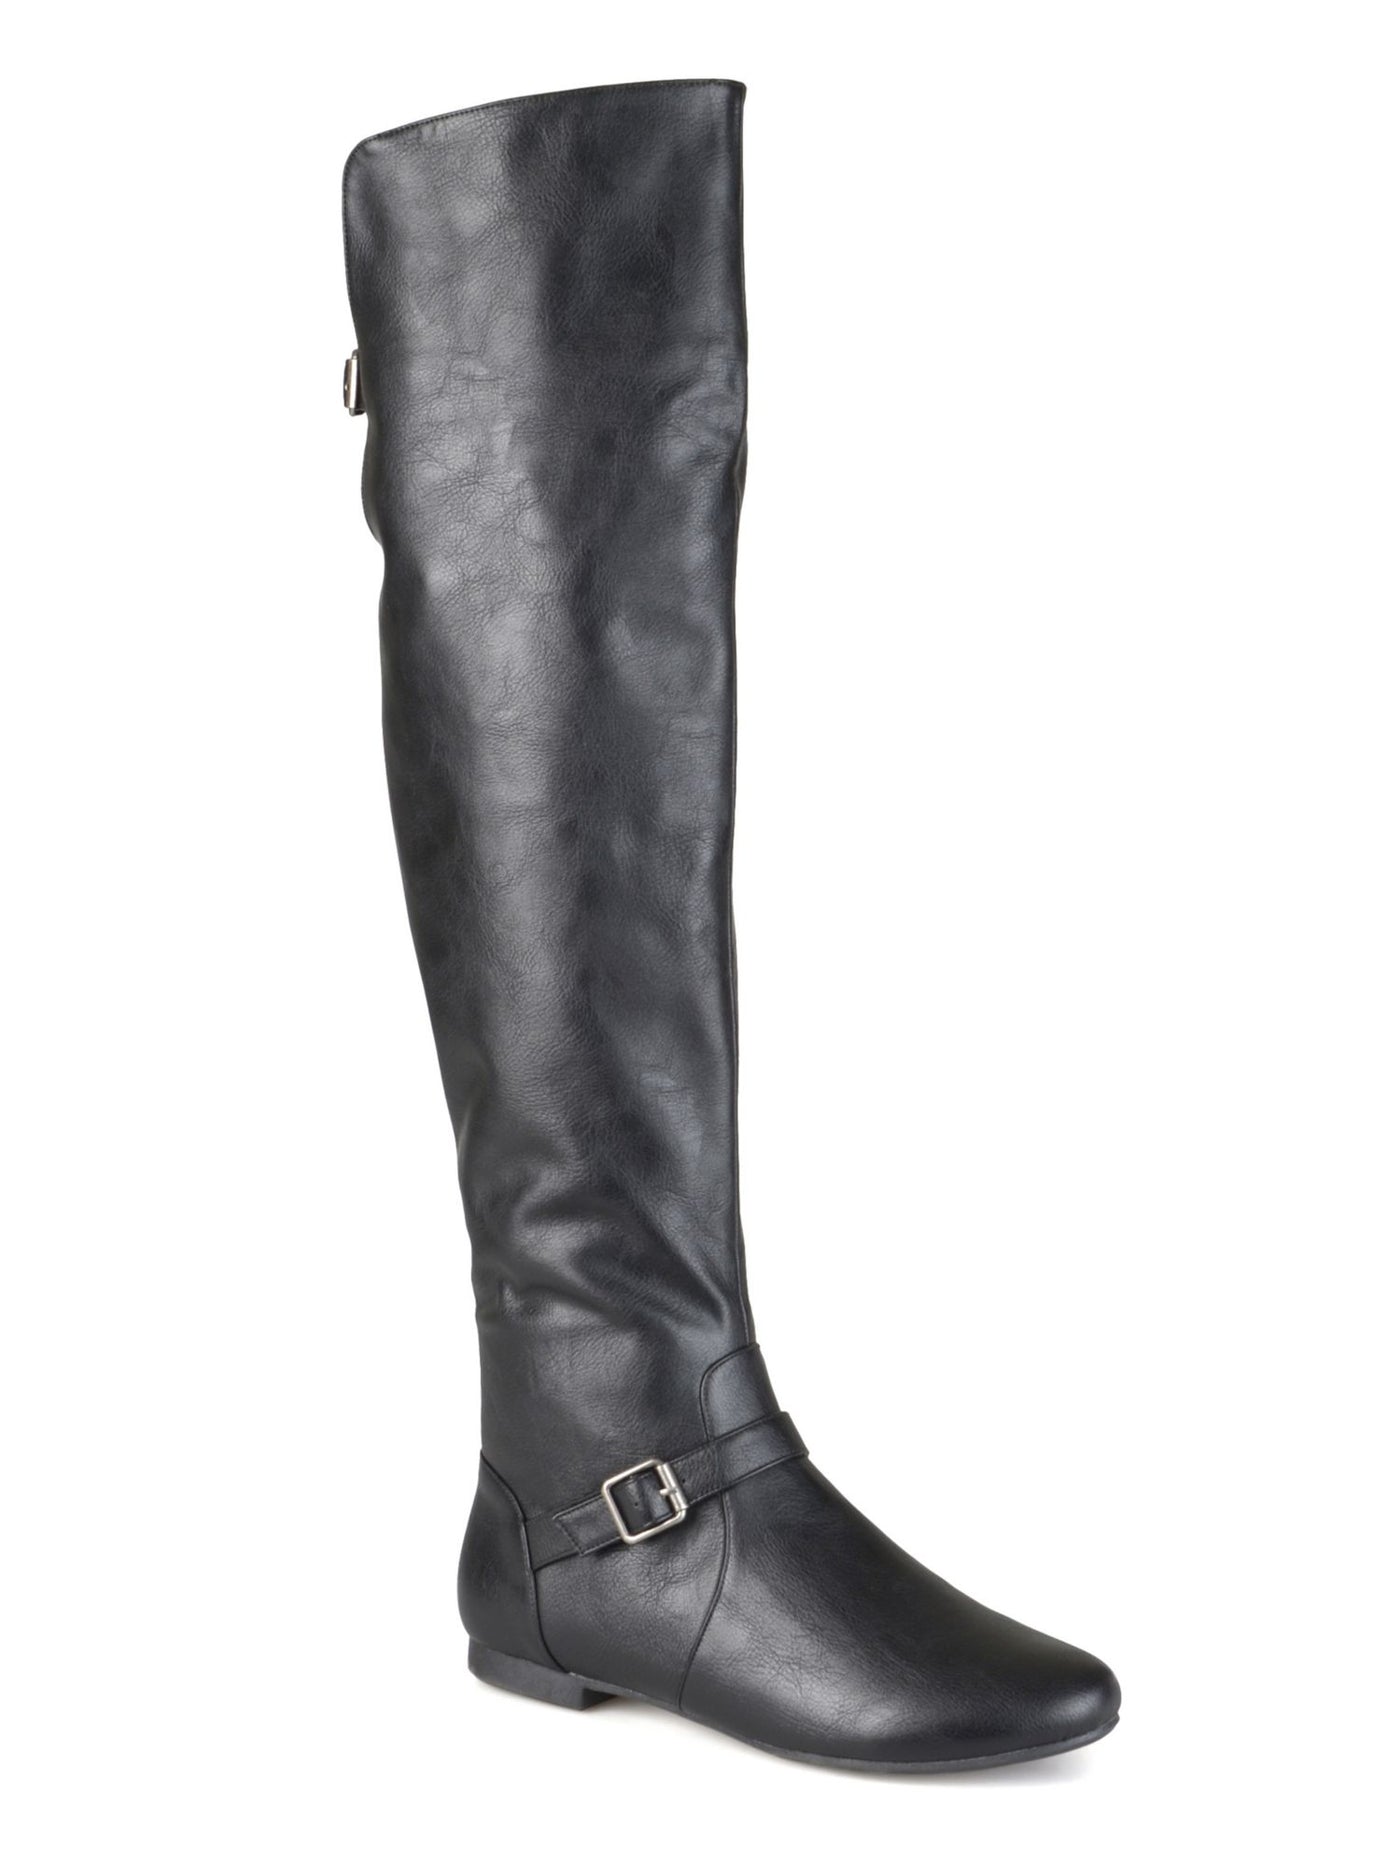 JOURNEE COLLECTION Womens Black Buckle Accent Padded Loft Round Toe Zip-Up Riding Boot 6 M